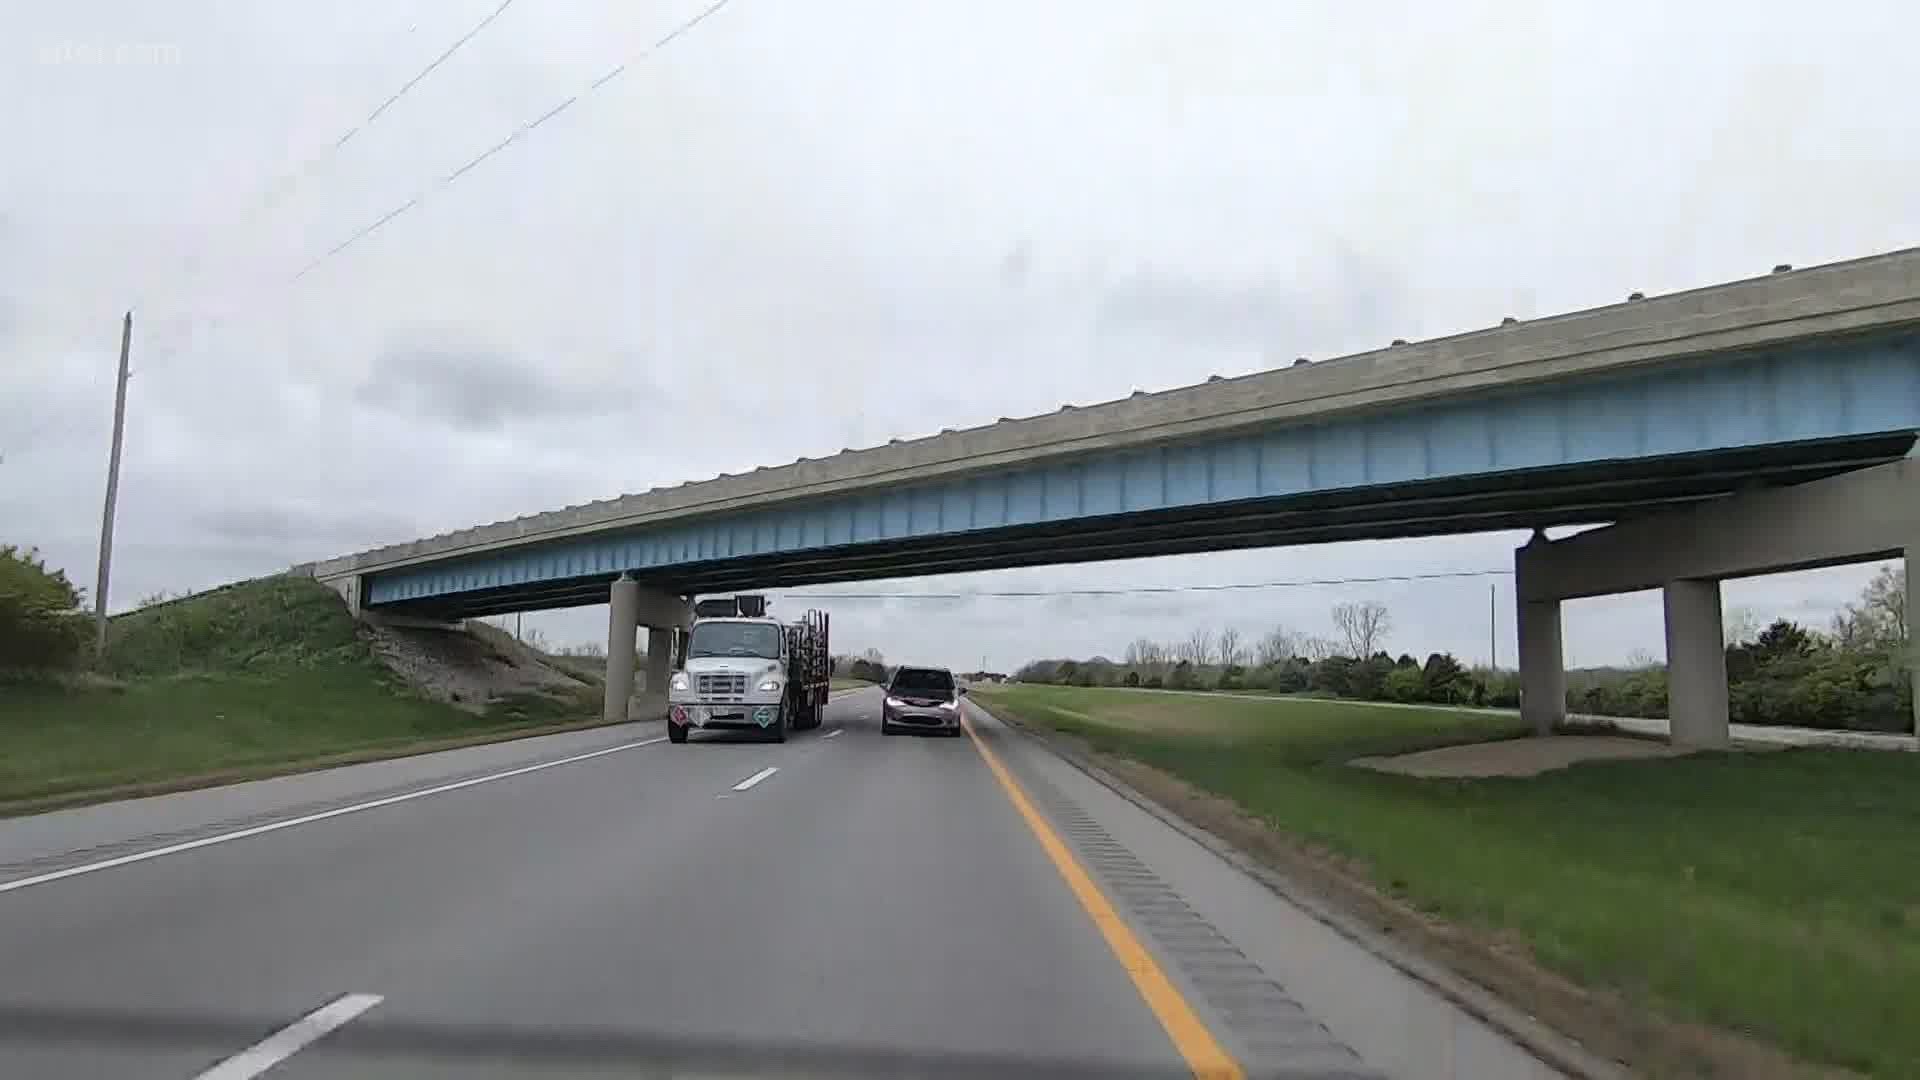 Since the corridor was established, ODOT says there have been no fatal accidents on that 20-mile stretch of I-75 between Findlay and Beaverdam.